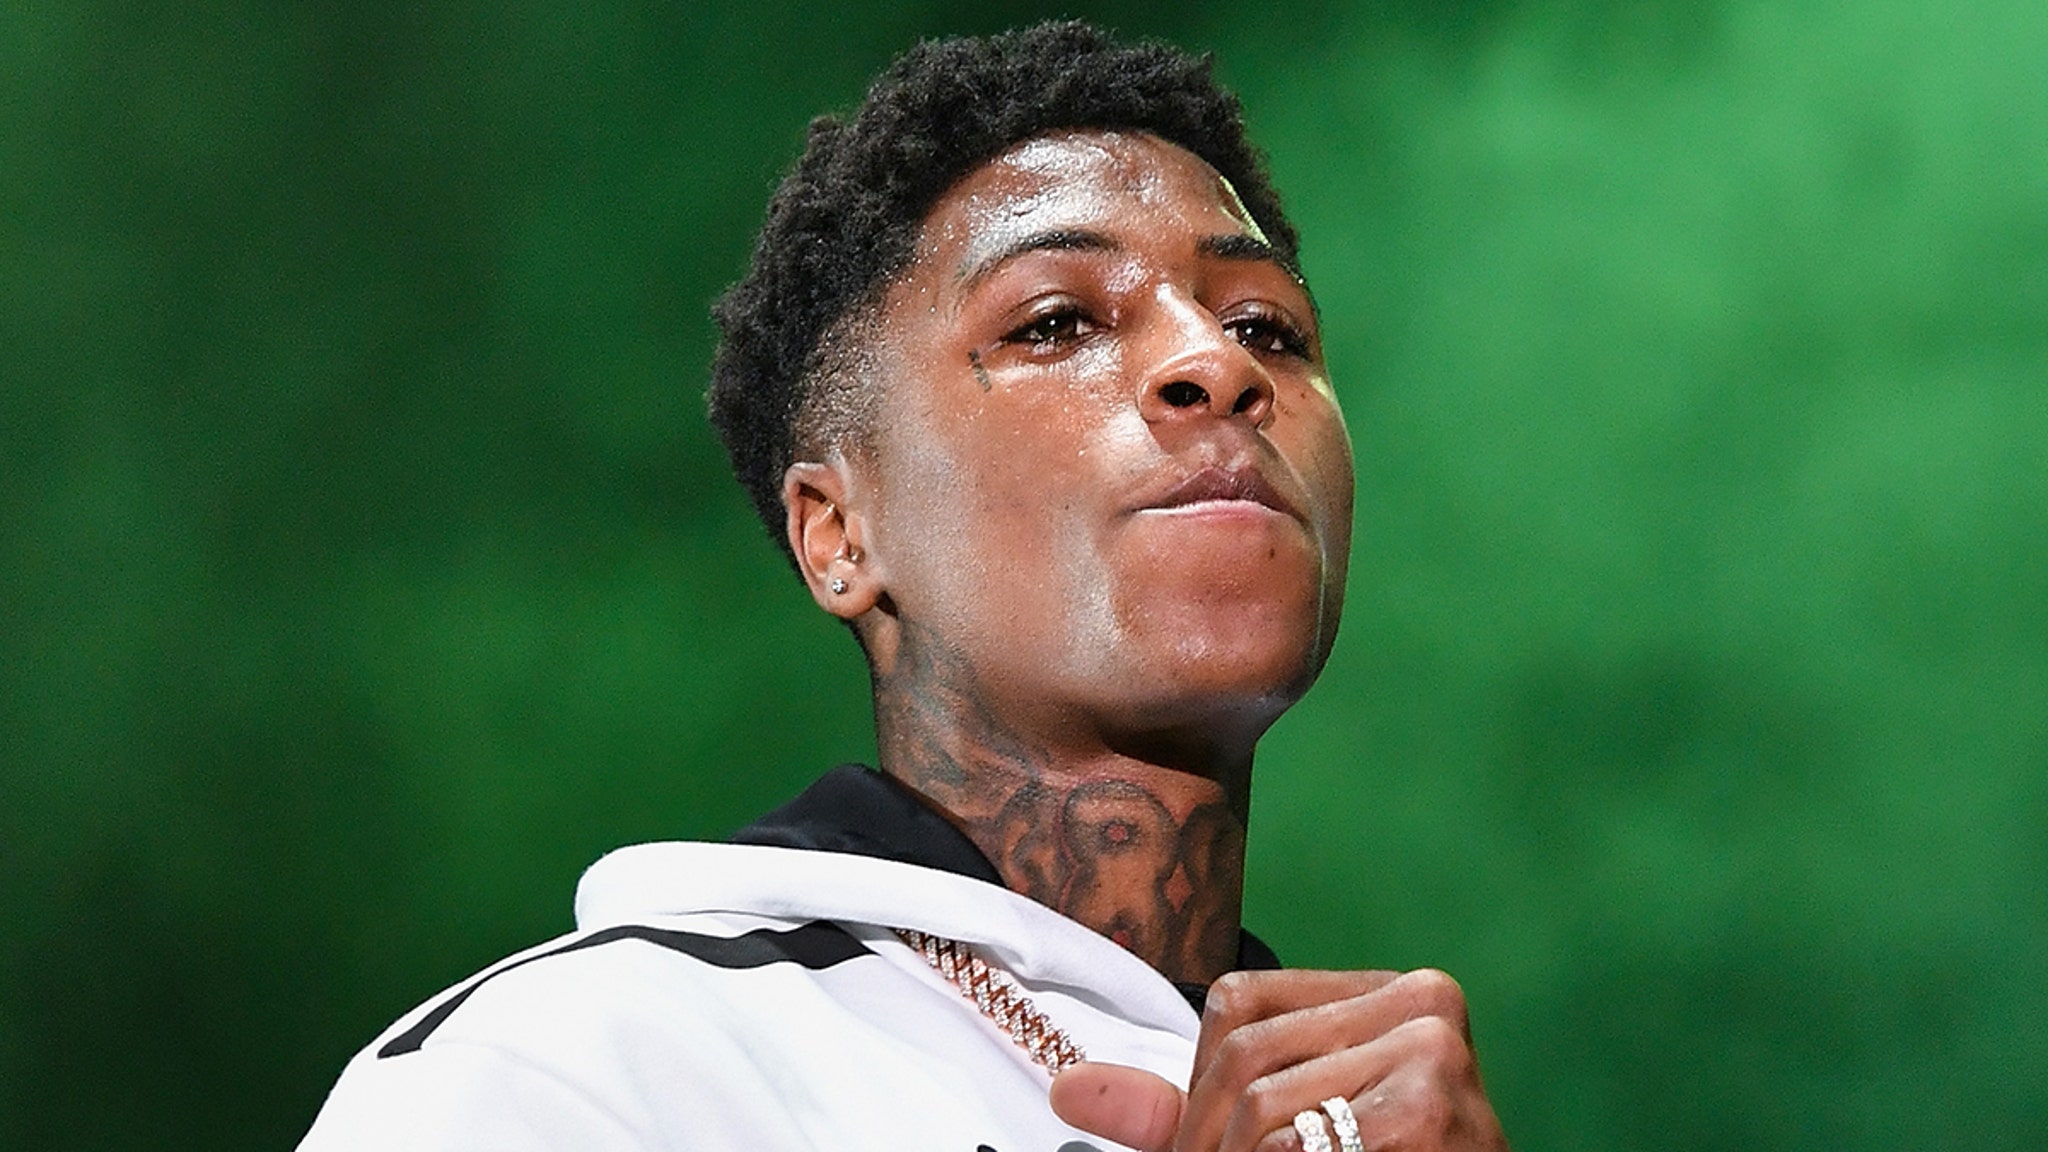 NBA Youngboy Arrested In Utah On Drug and Weapons Charges